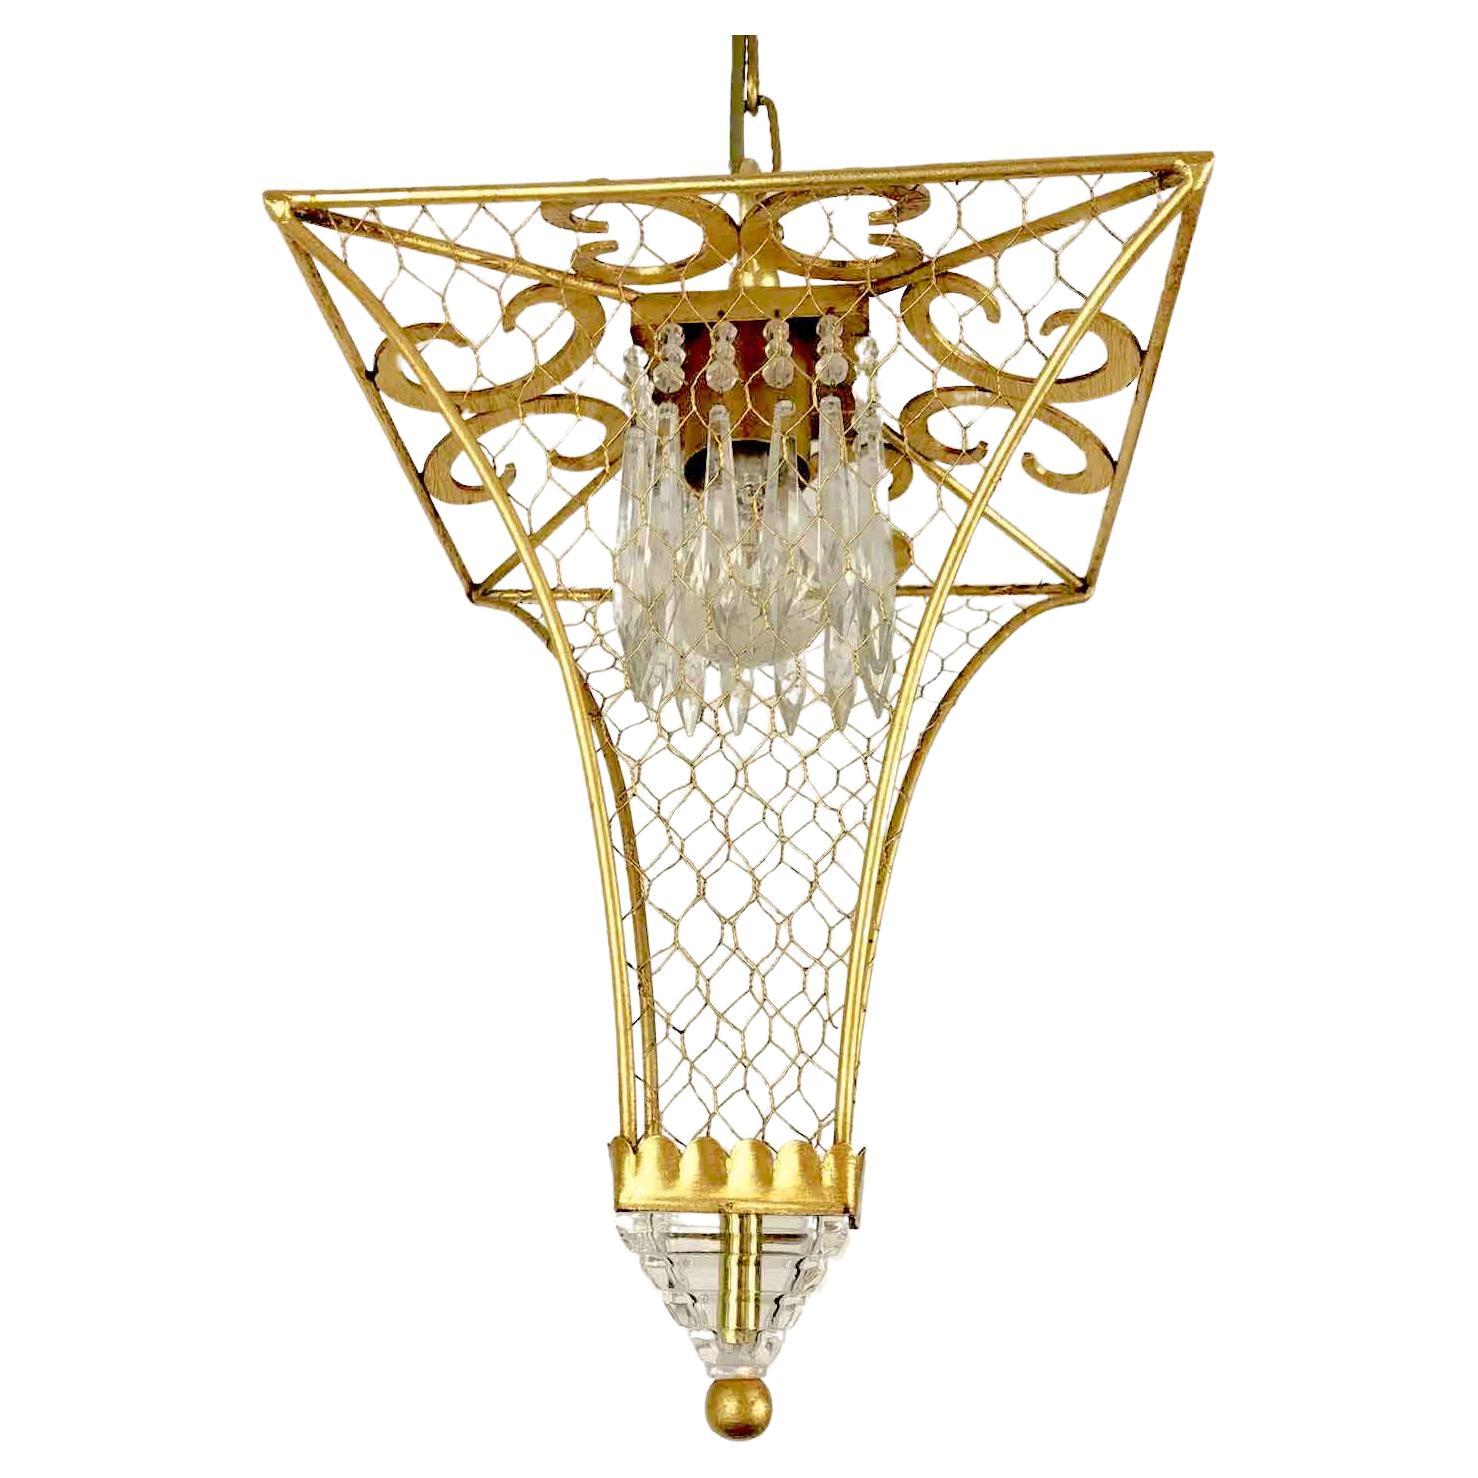 Florentine Pagoda Pendant by Banci Italian Gilded Lantern with Crystals 1990s For Sale